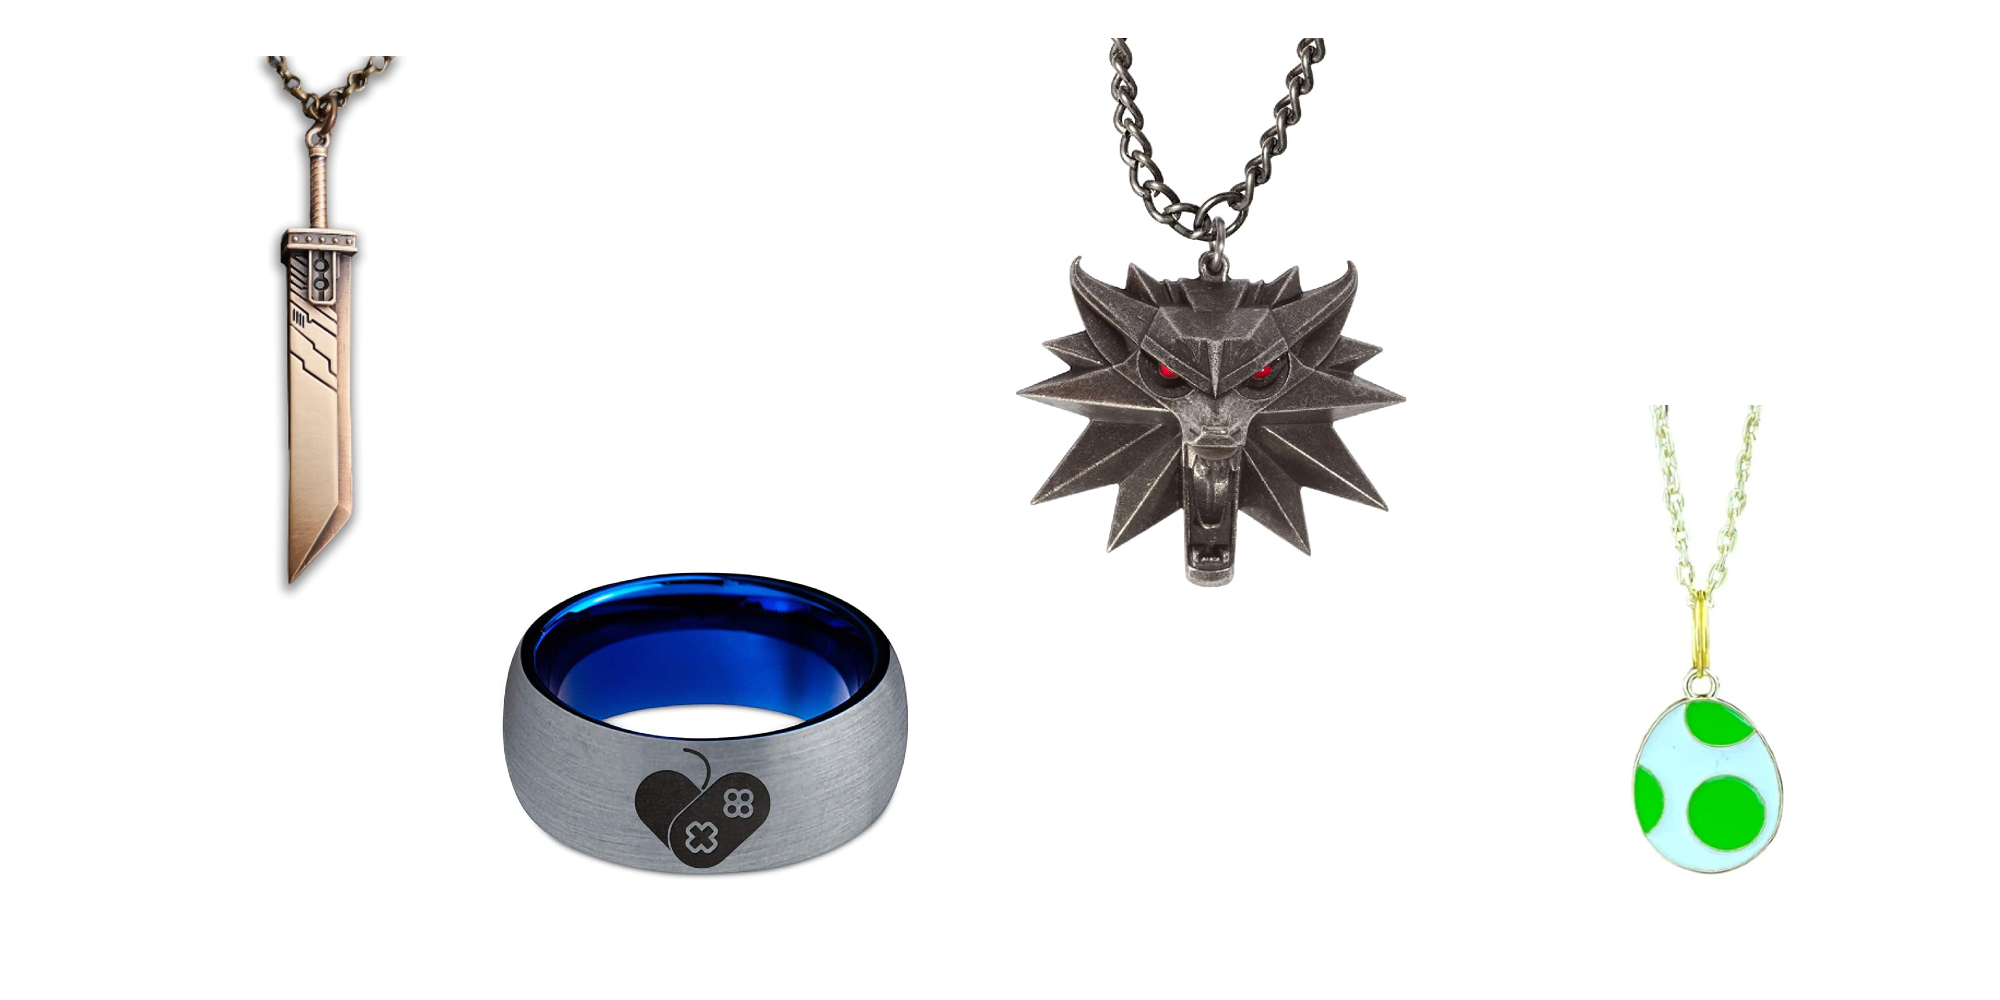 Header image for Best Video Game Jewelry with images of Witcher 3 medallion, Yoshi egg pendant, Emoji Heart ring, and Buster Sword pendant